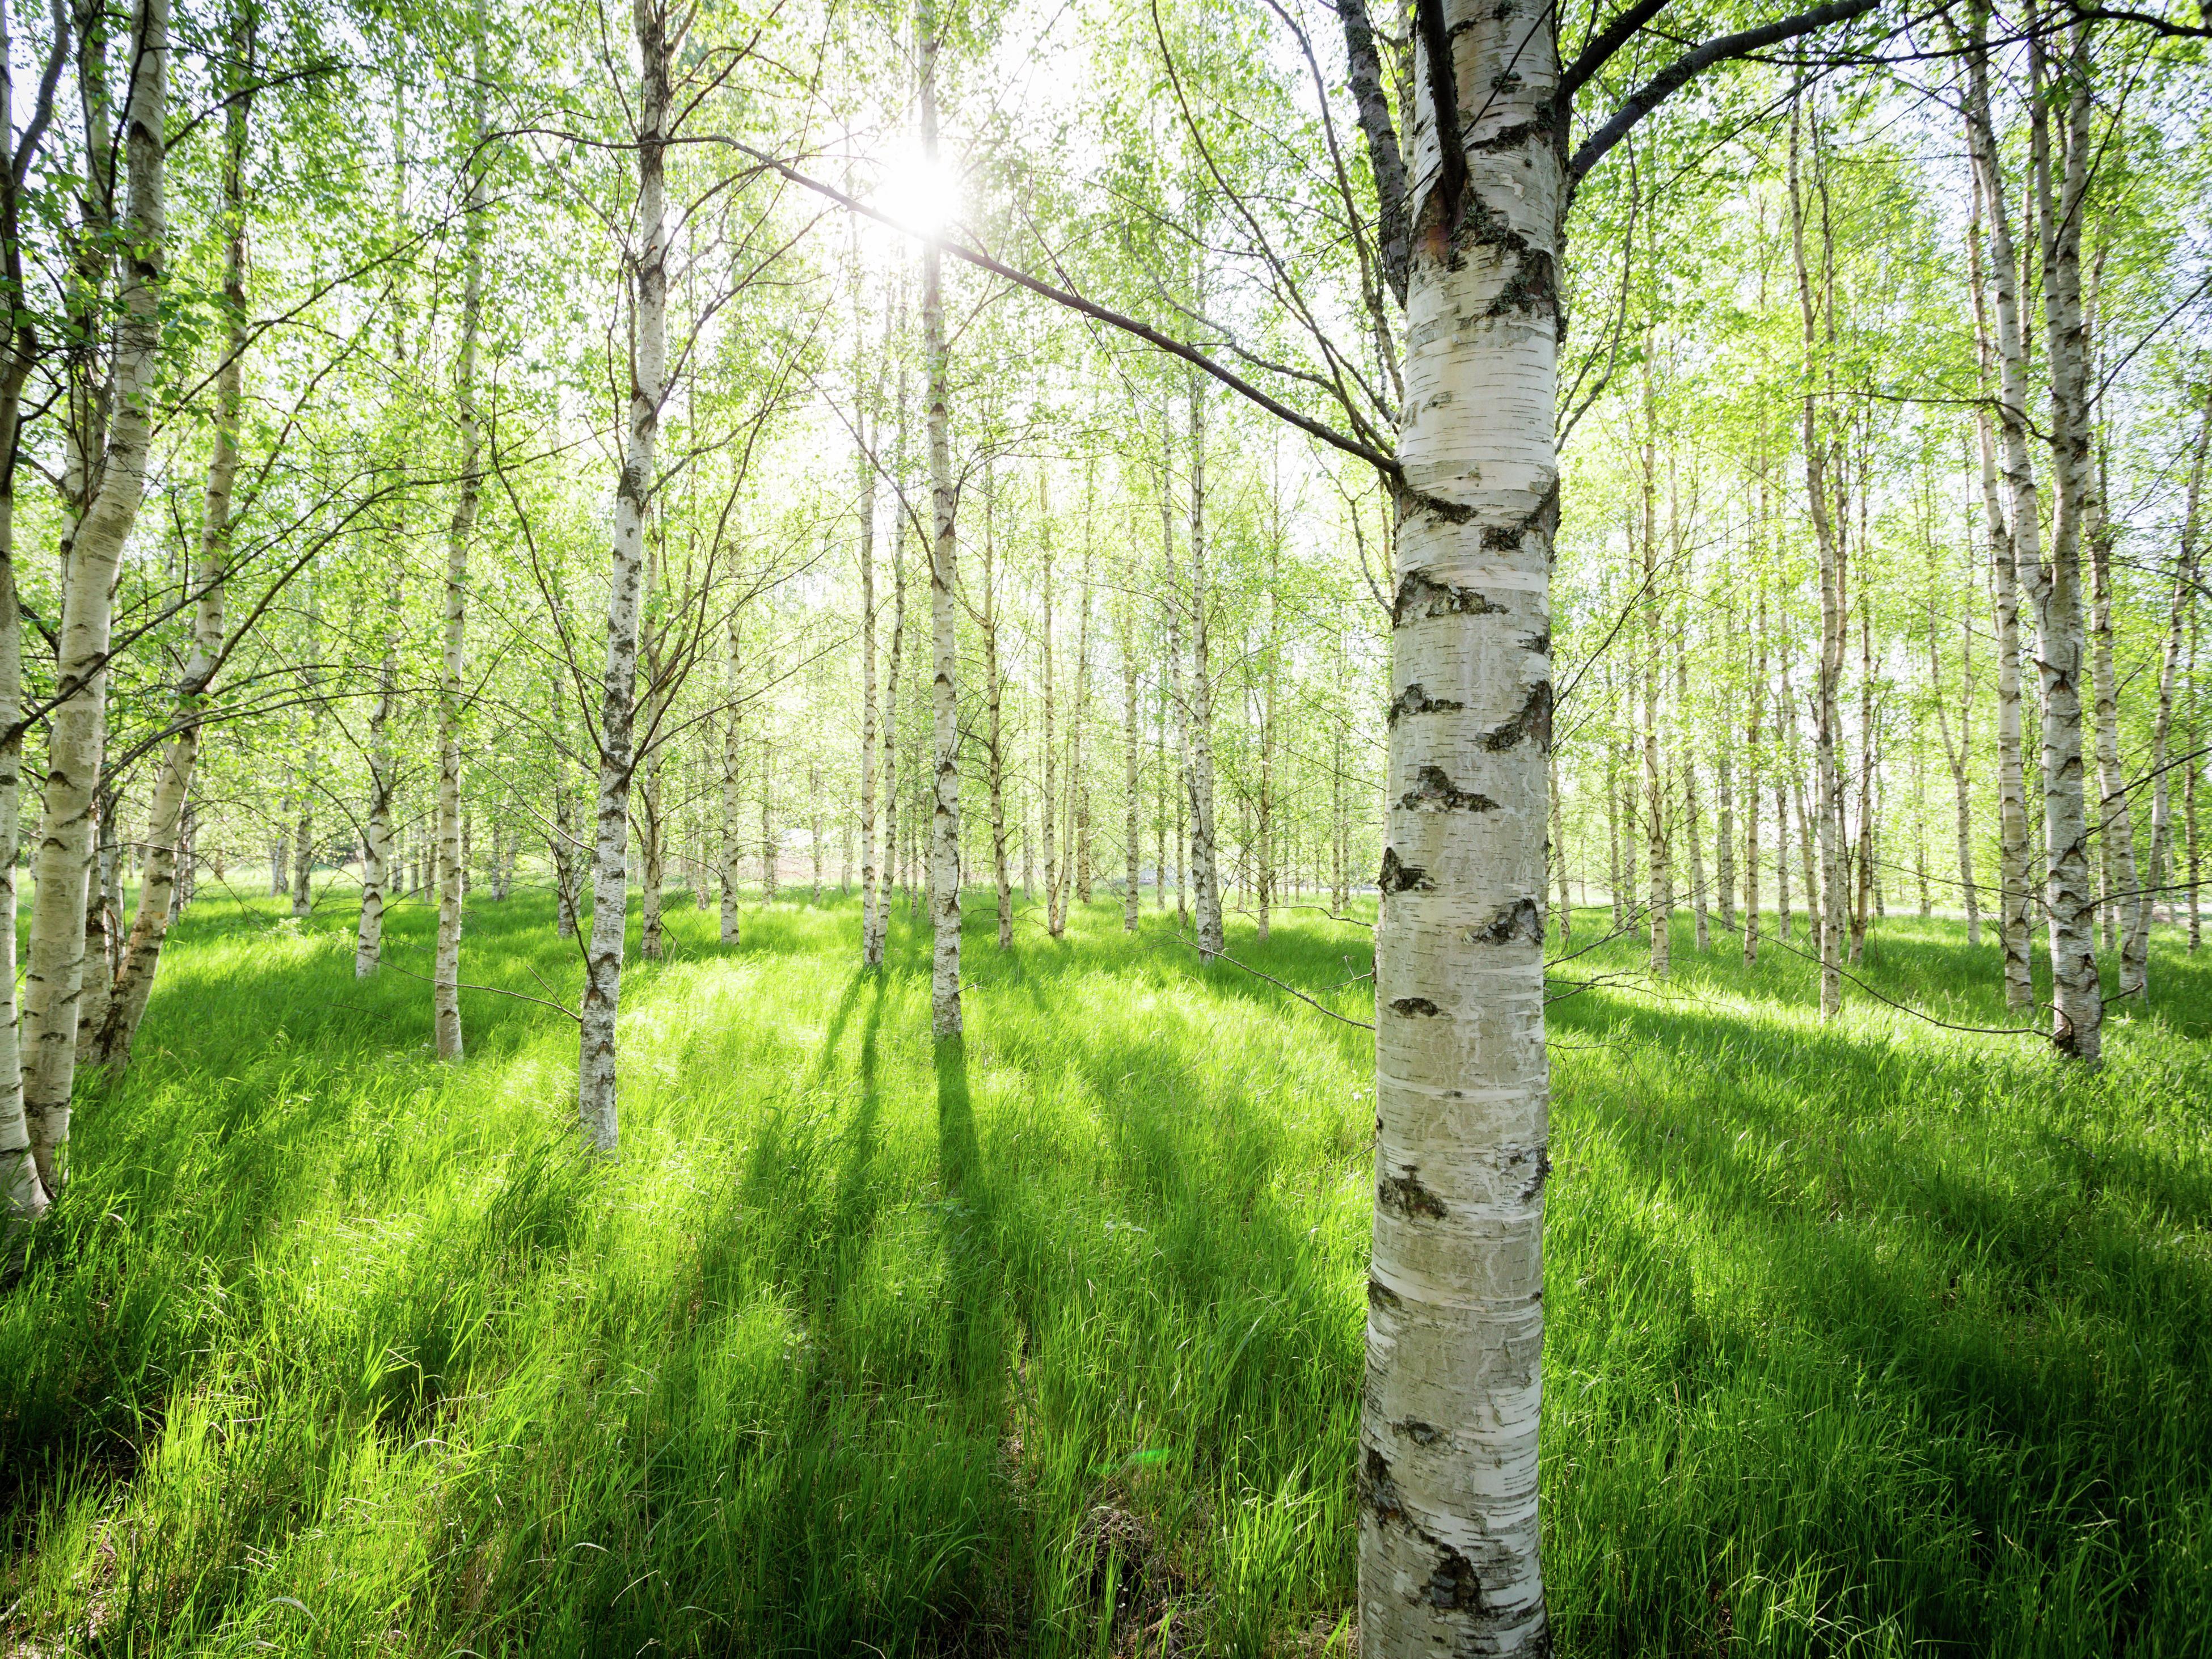 Birch trees: a guide to popular species